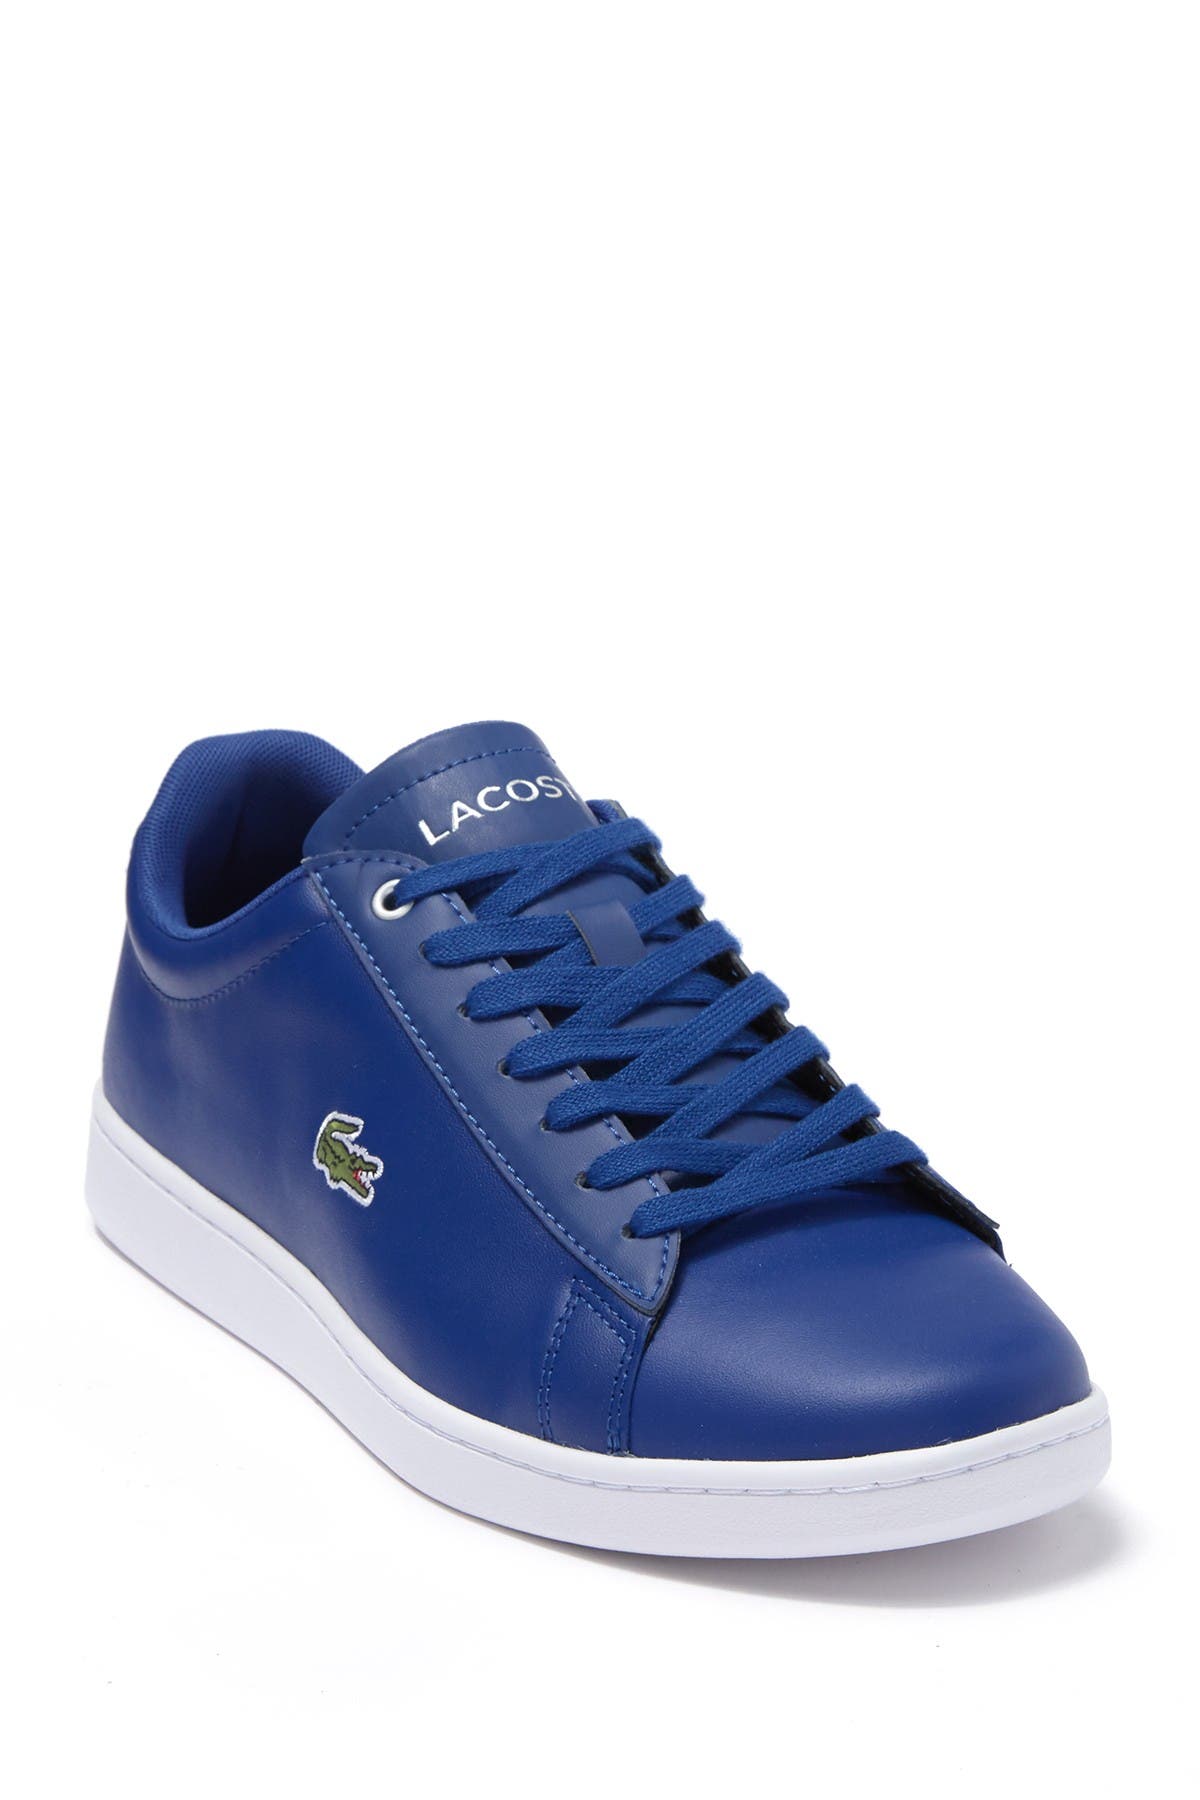 Lacoste | Hydez 319 Leather Sneaker 